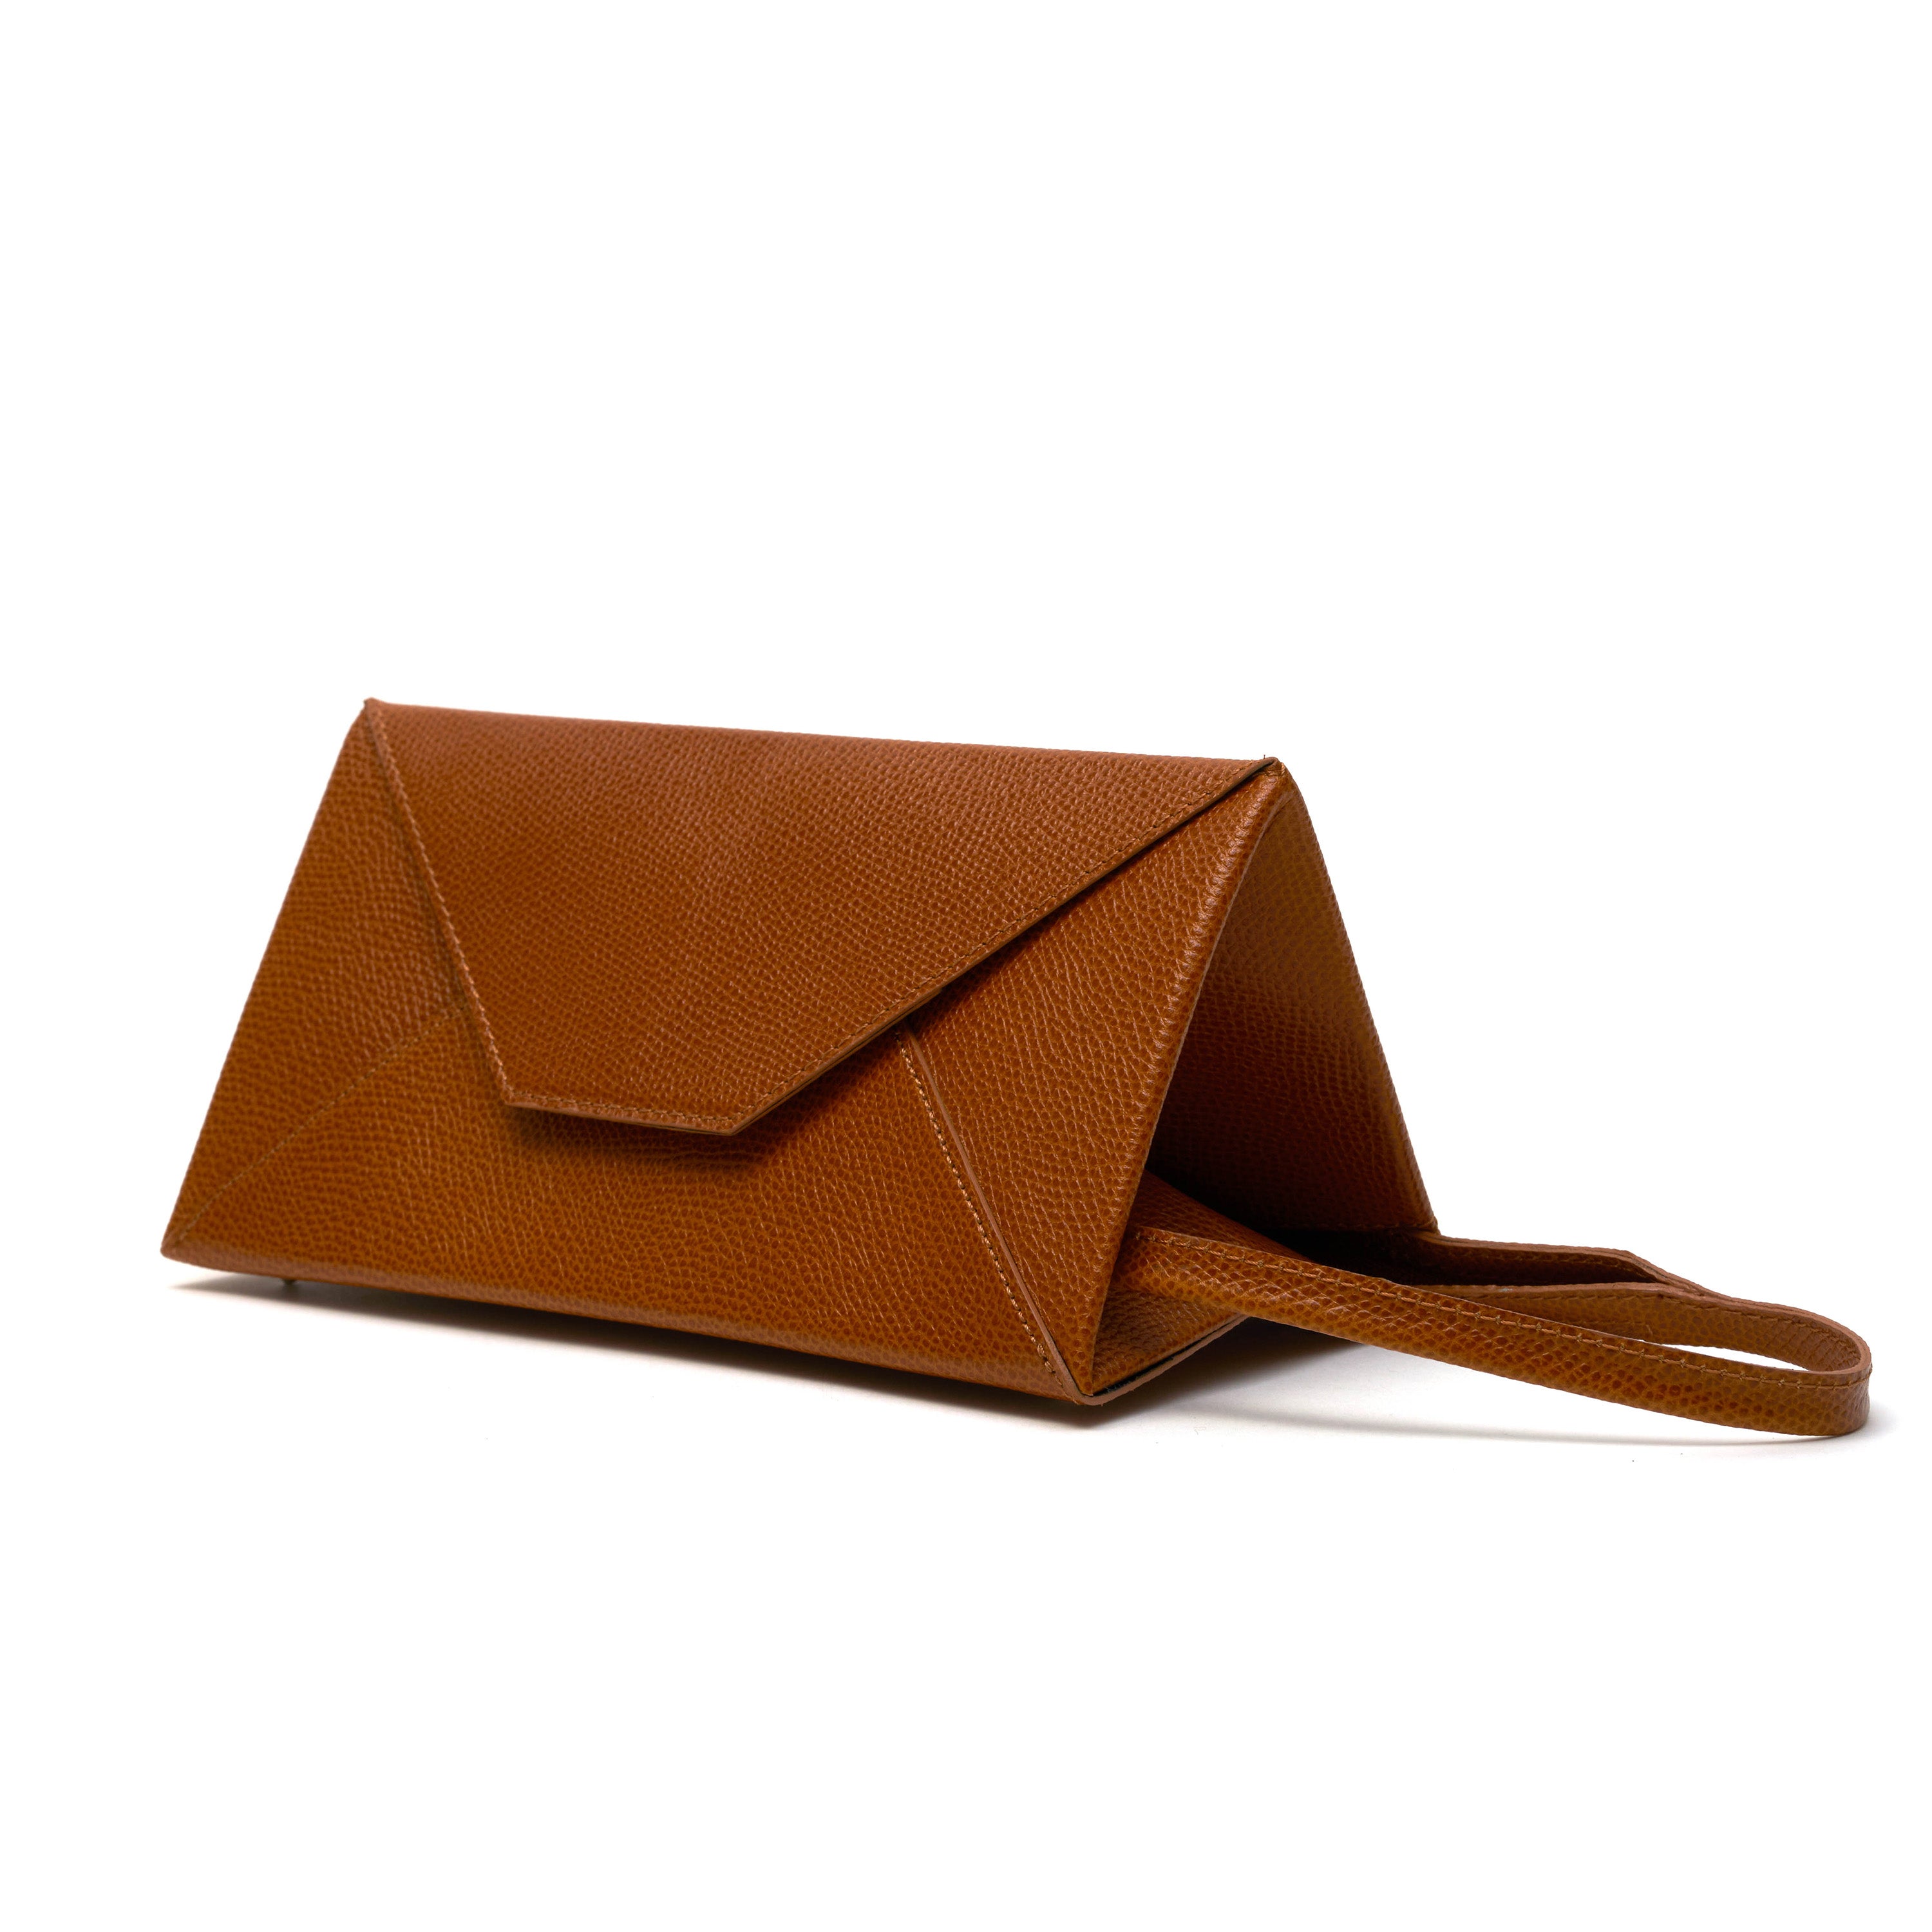 TRICE - 2WAY ENVELOPE POUCH